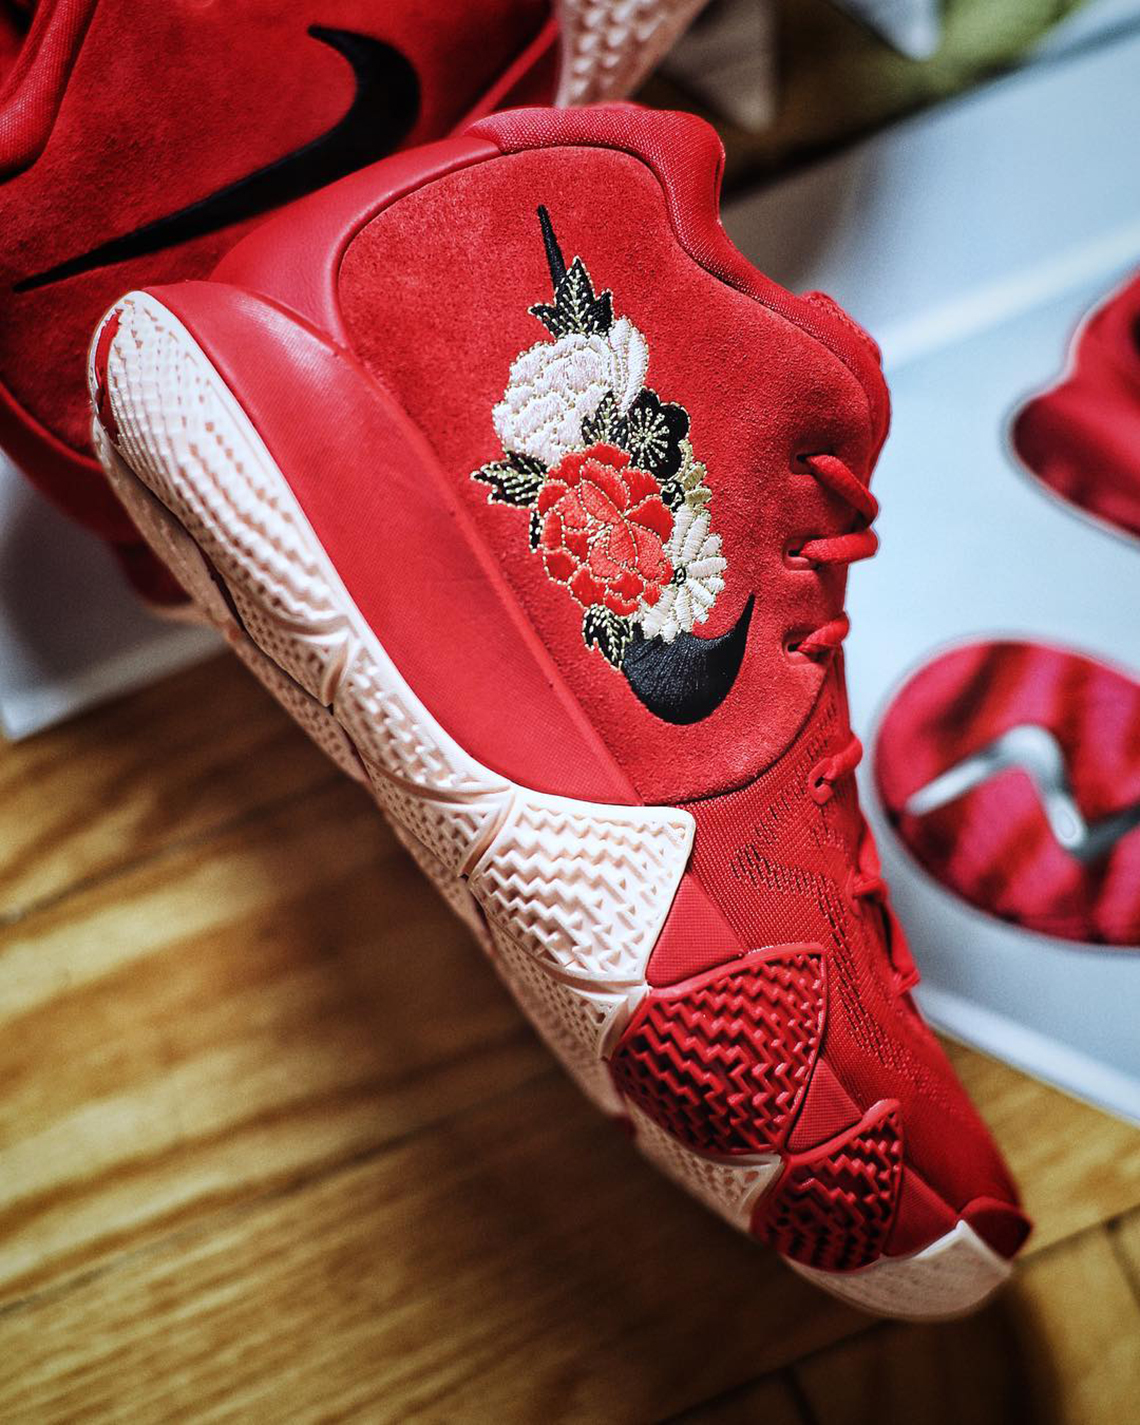 kyrie 4 chinese new year for sale